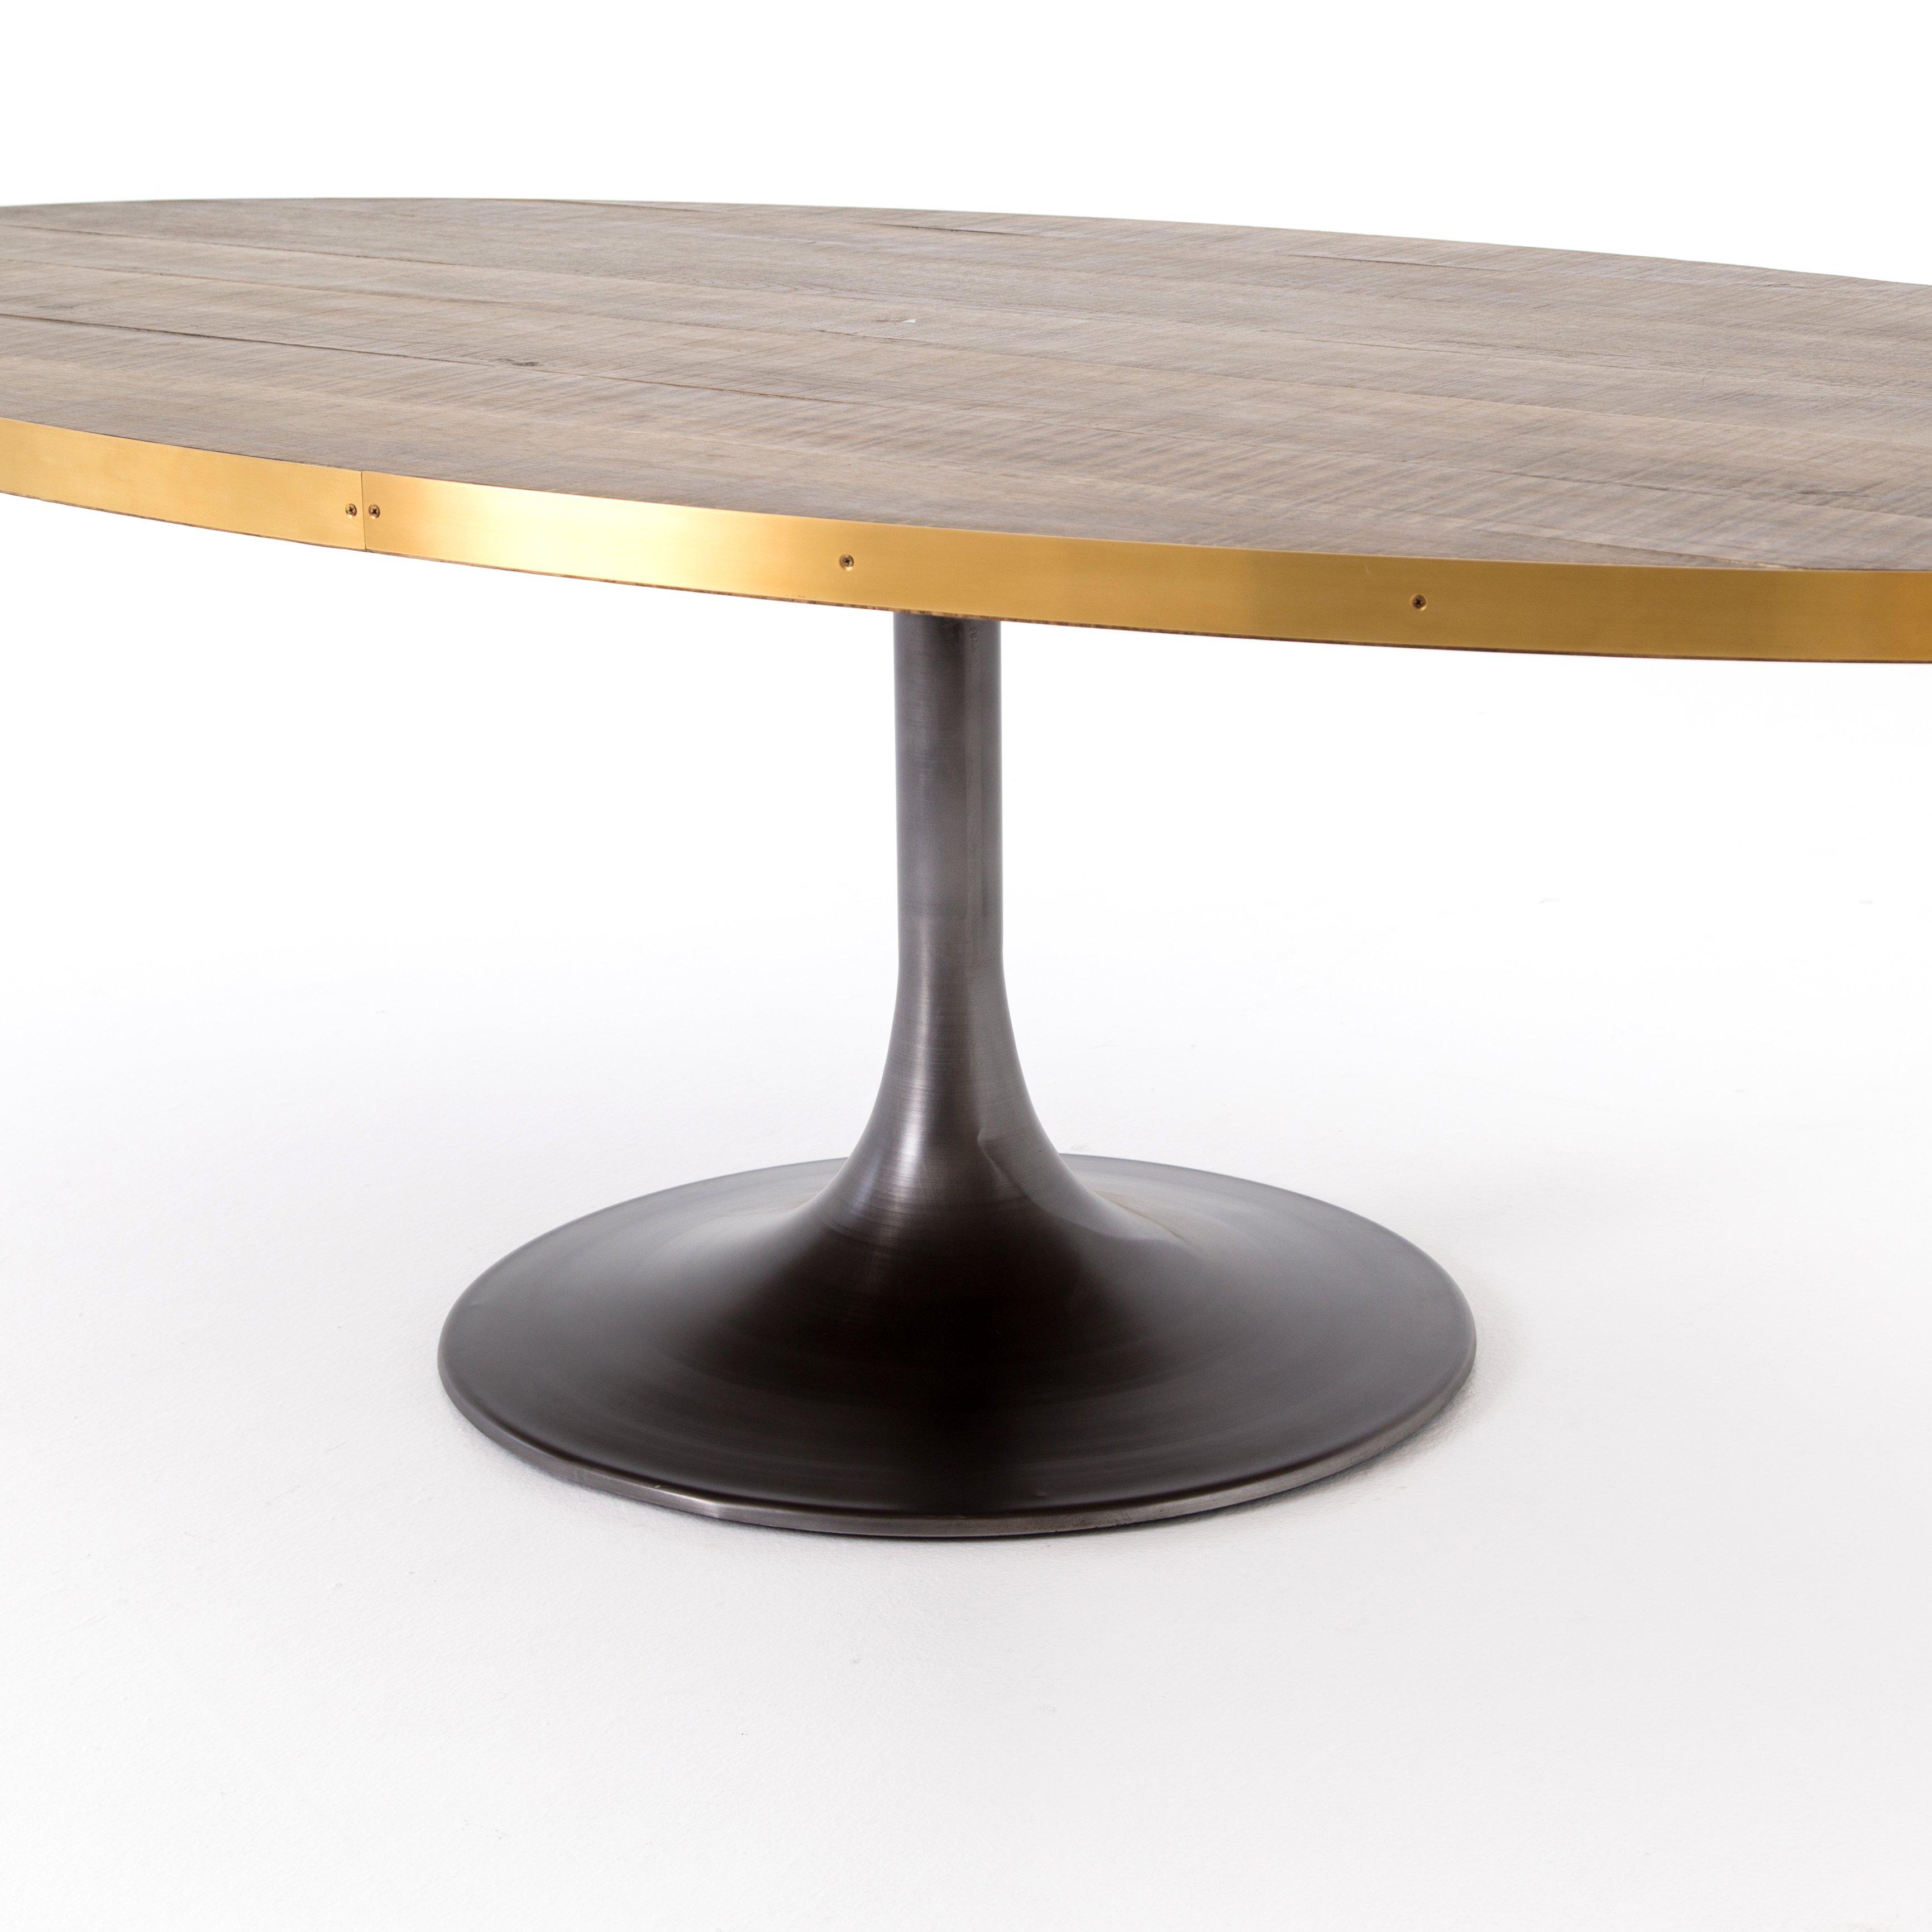 Four Hands FURNITURE - Belvidere Oval Dining Table